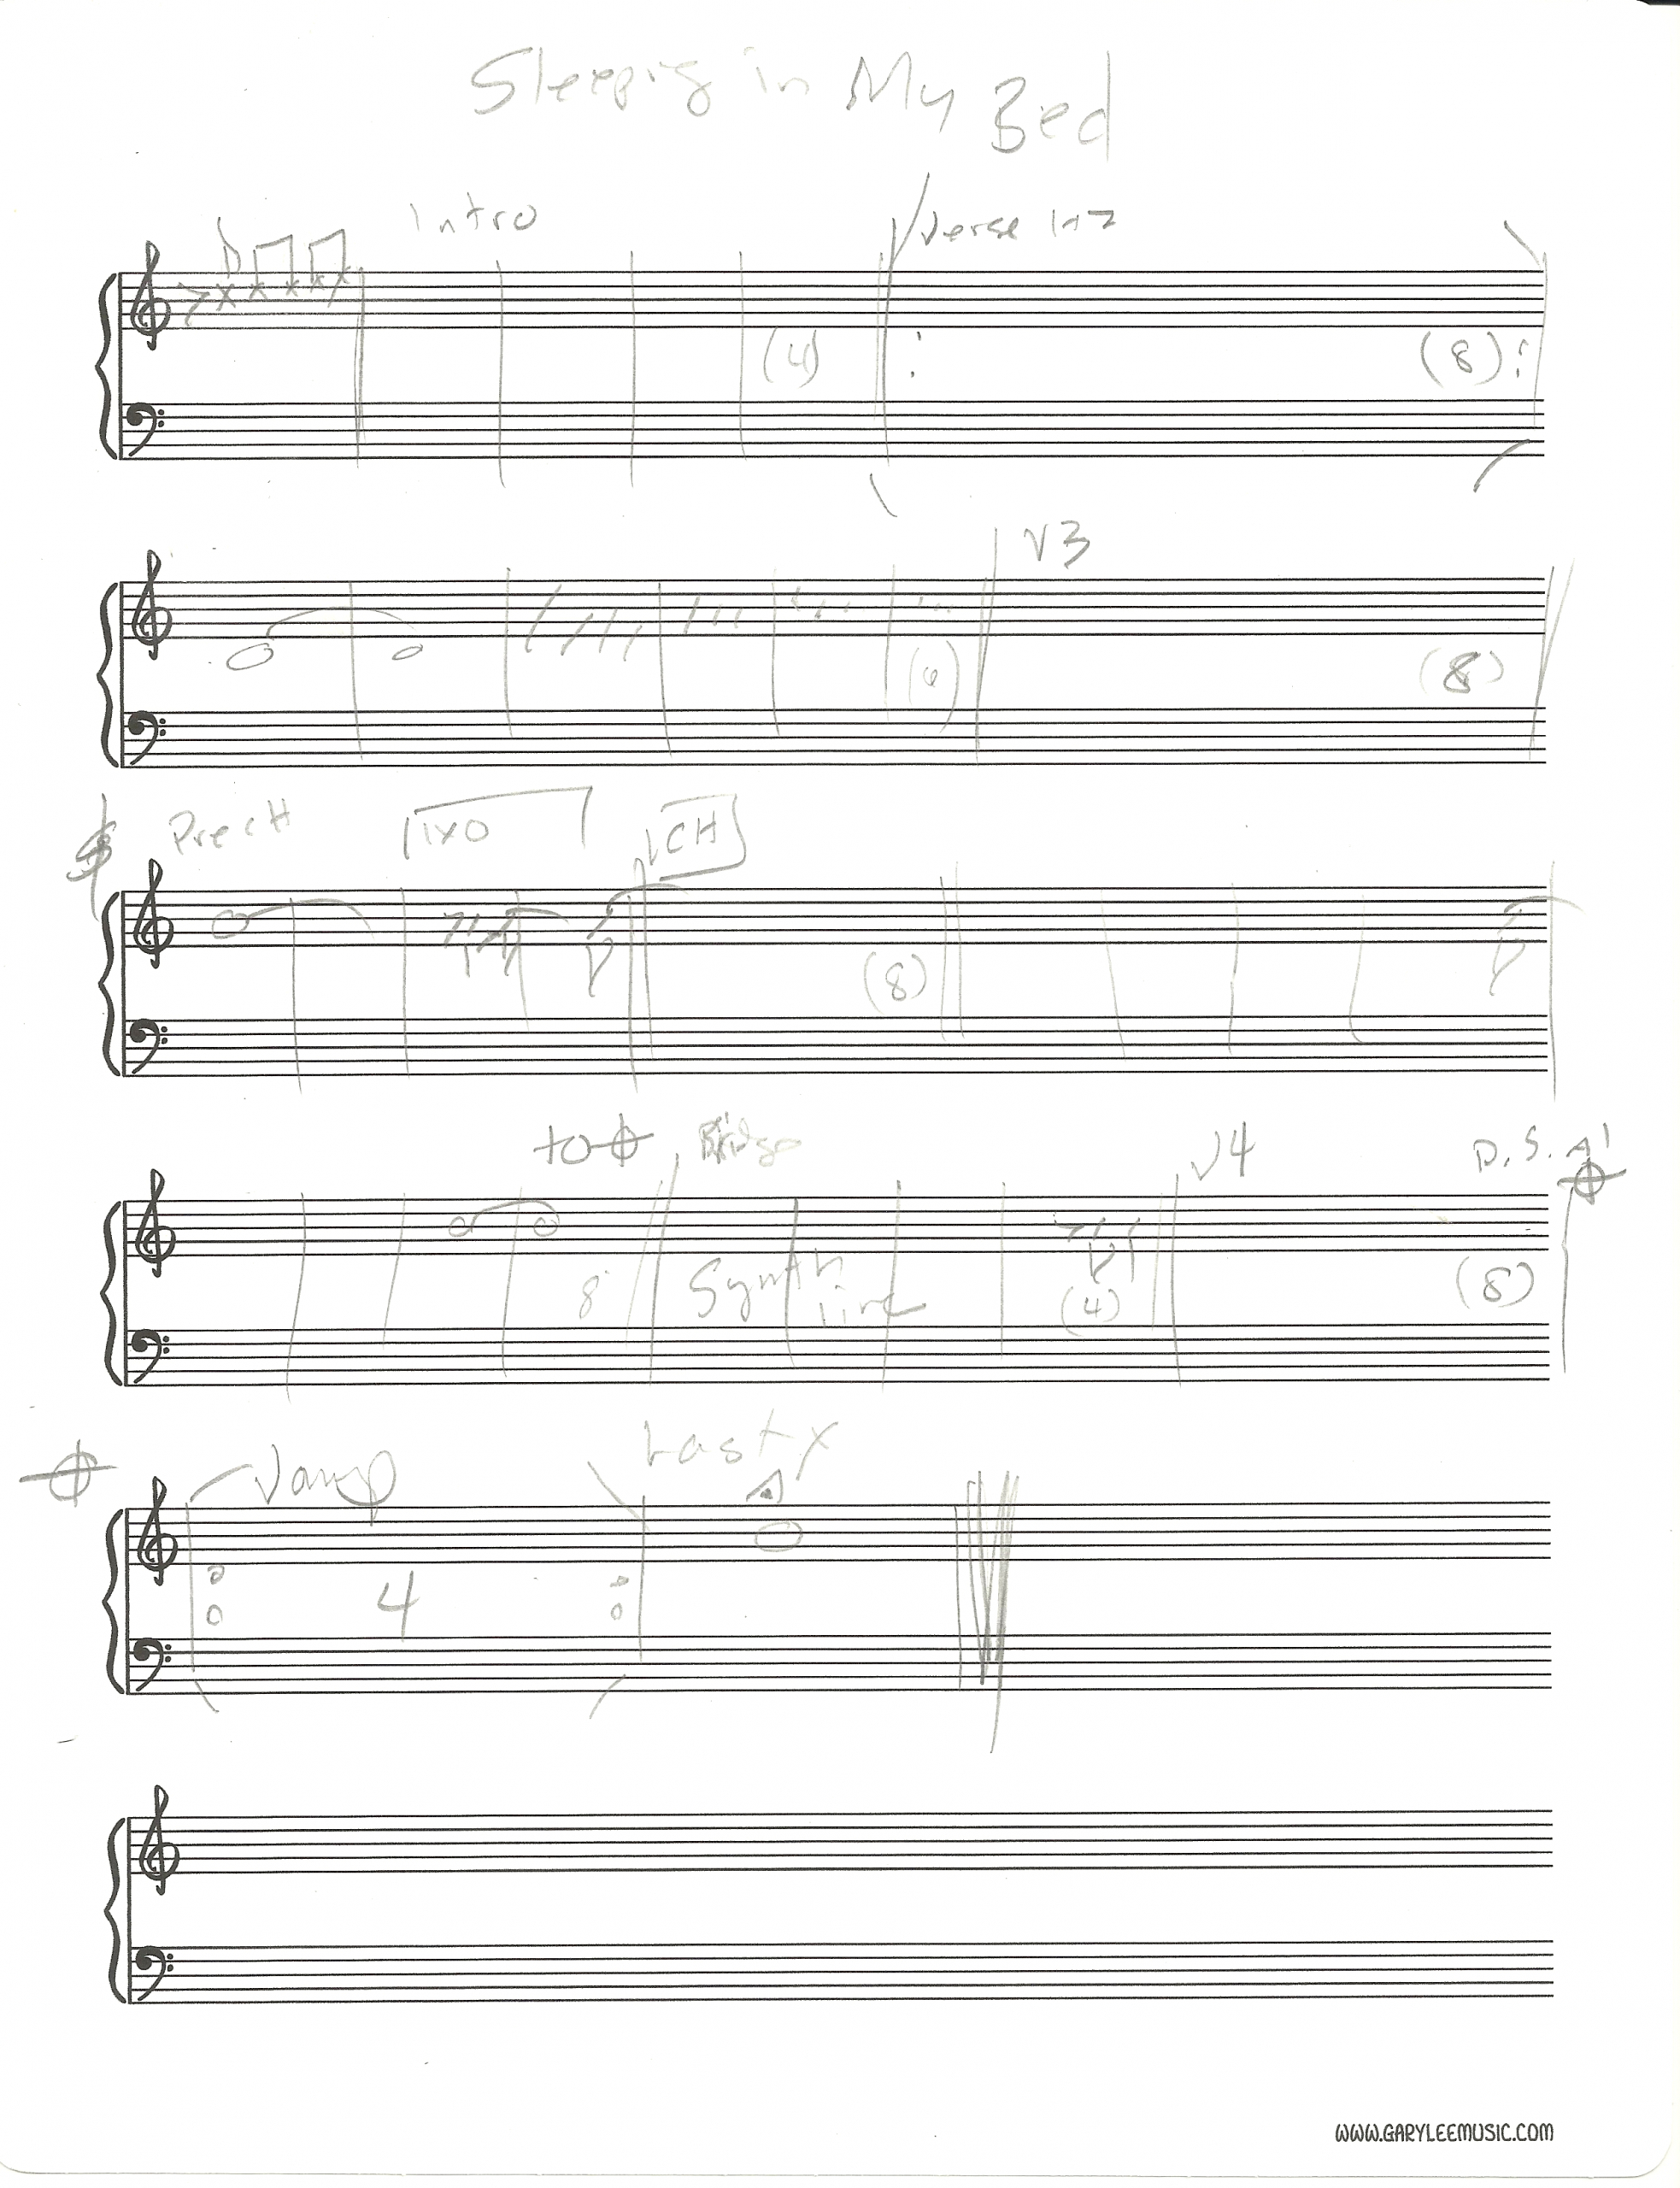 Sheet Music Template Blank For Word Free Pdf Spreadsheet Within Blank Sheet Music Template For Word